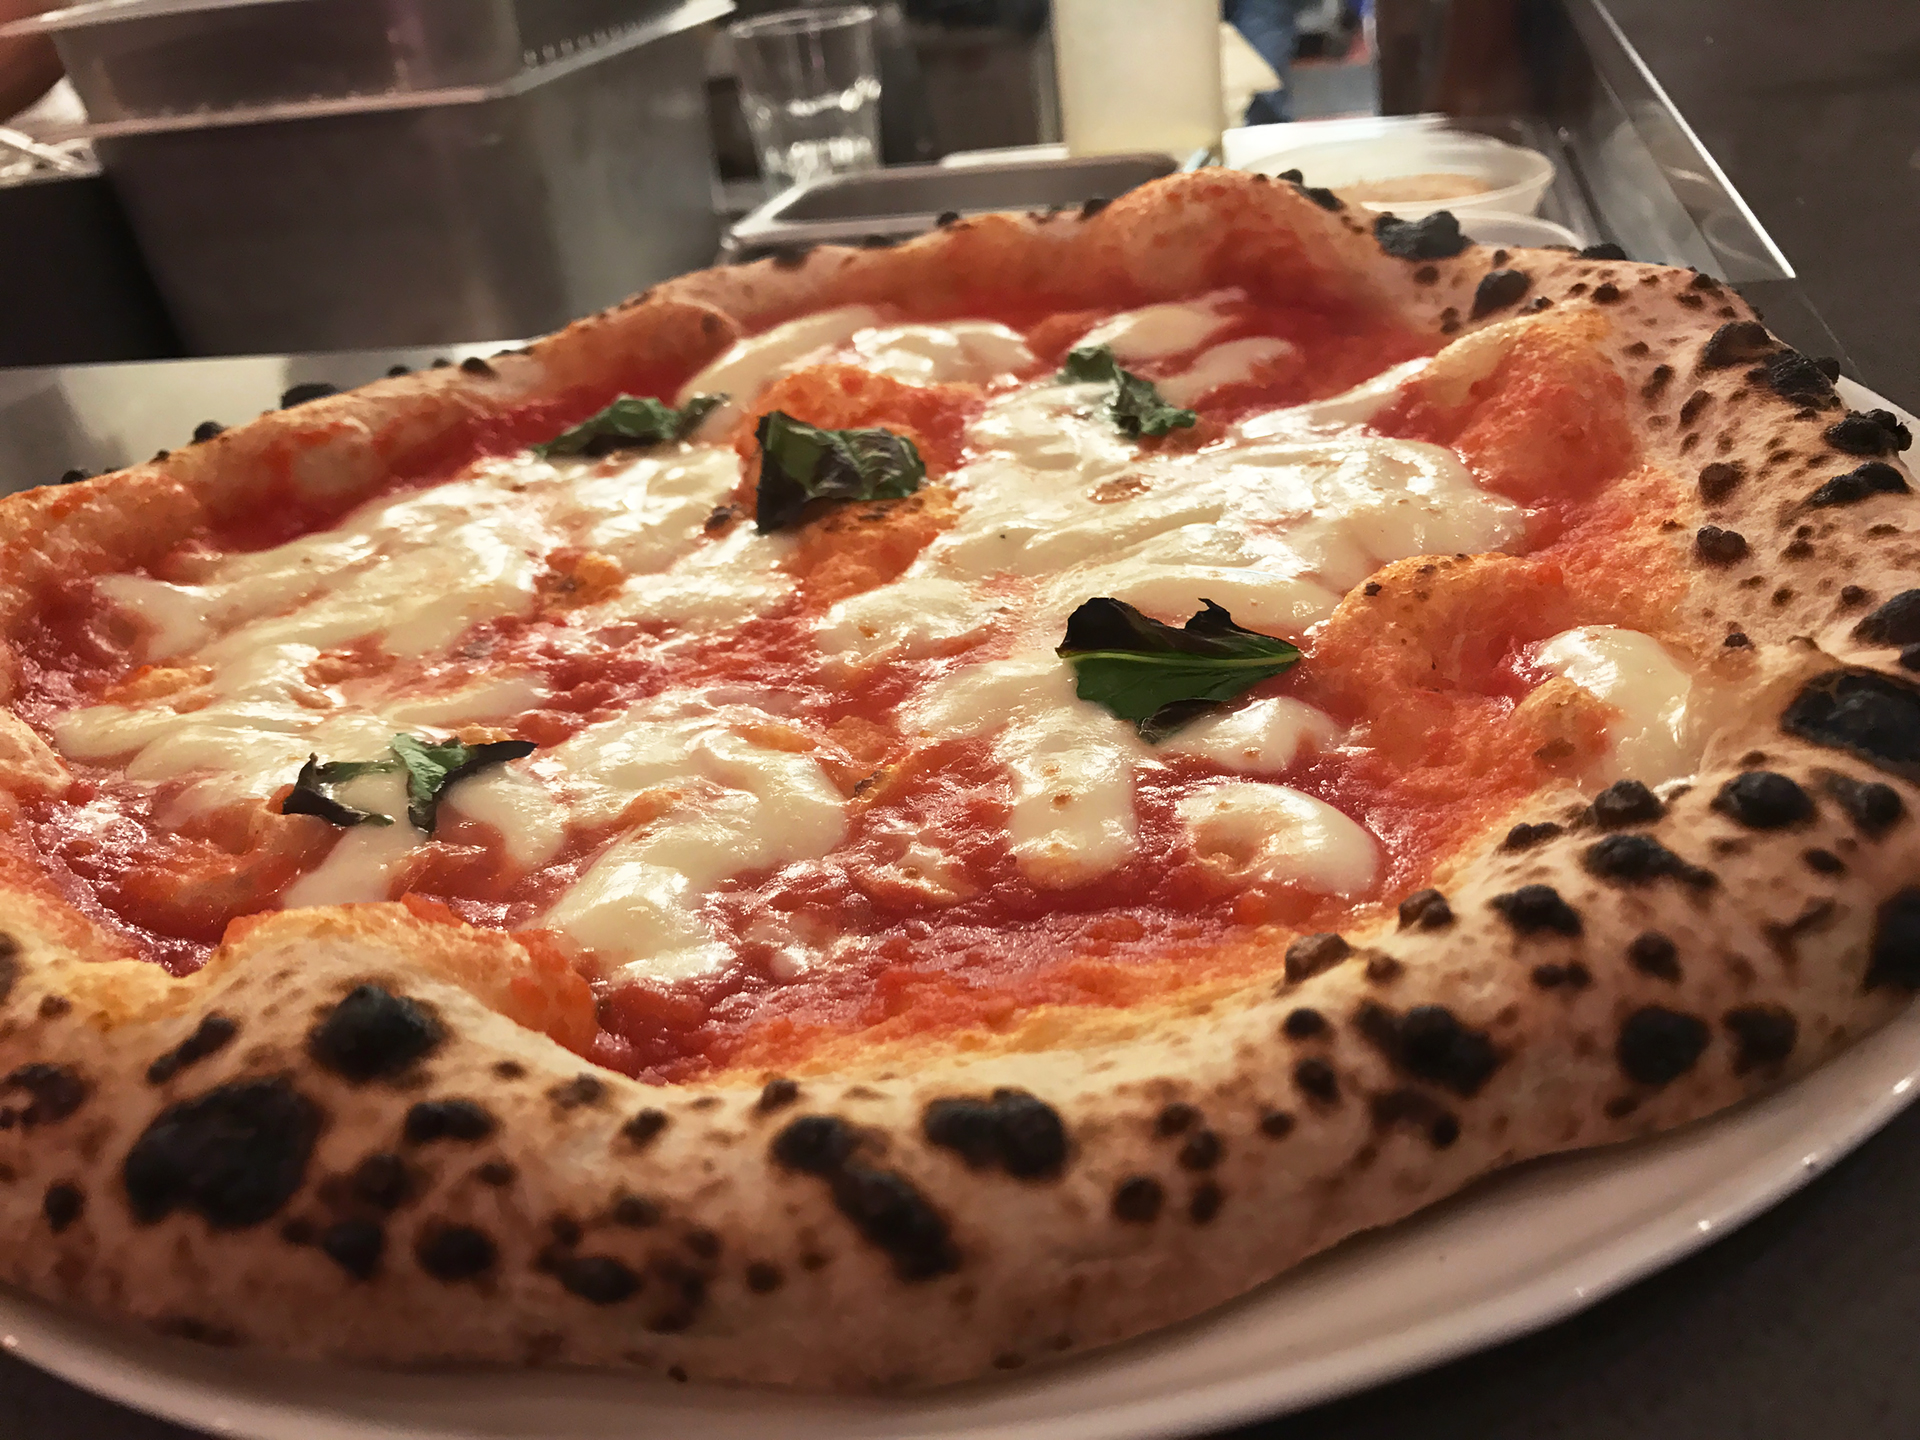 The best Margherita pizza for miles around.